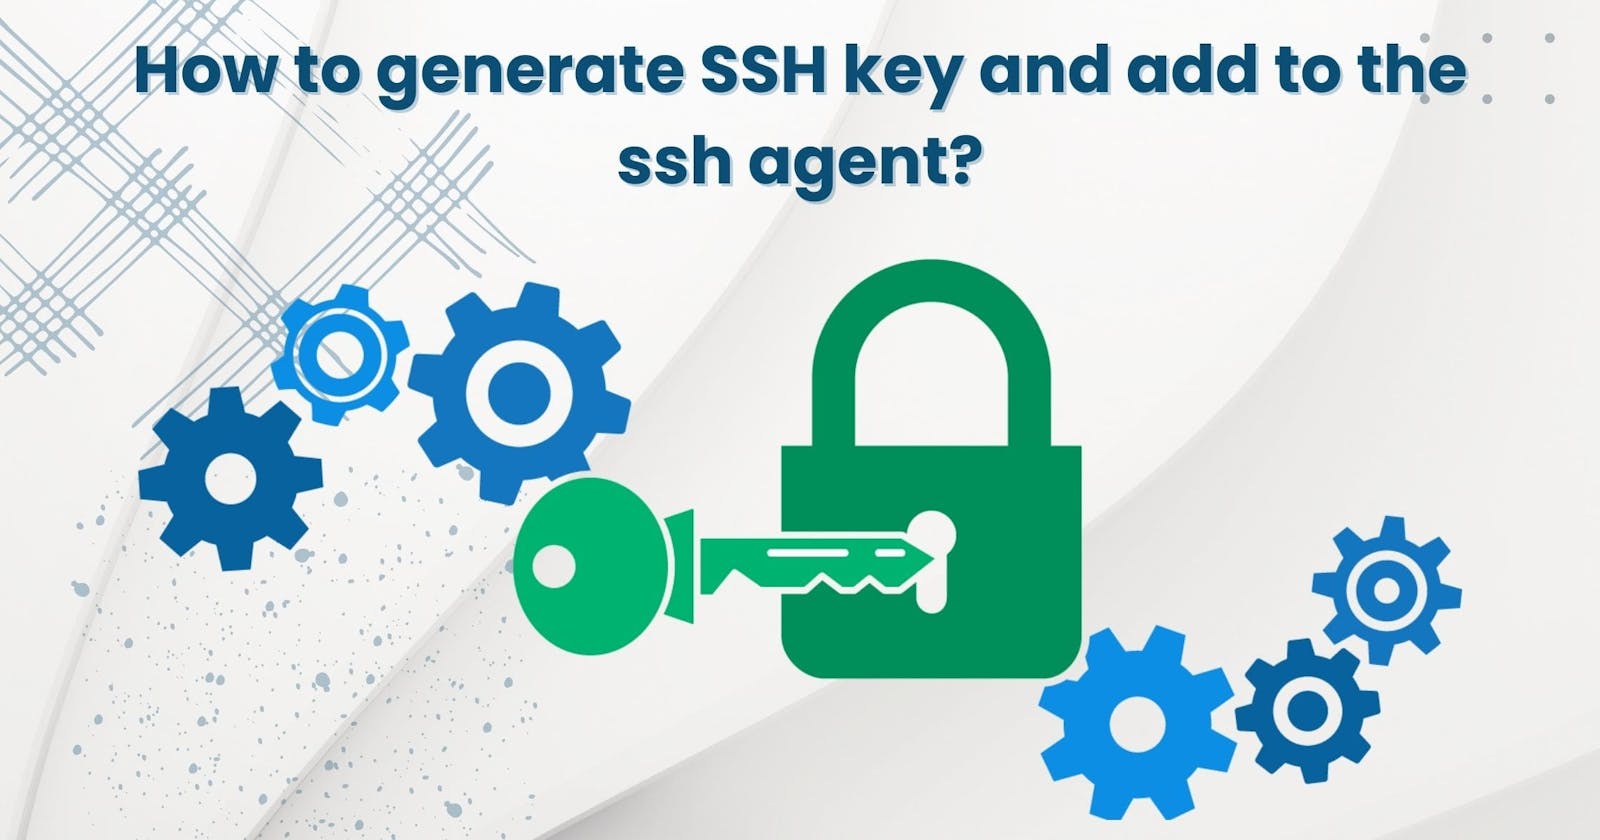 Generating a new SSH key and adding it to the ssh-agent